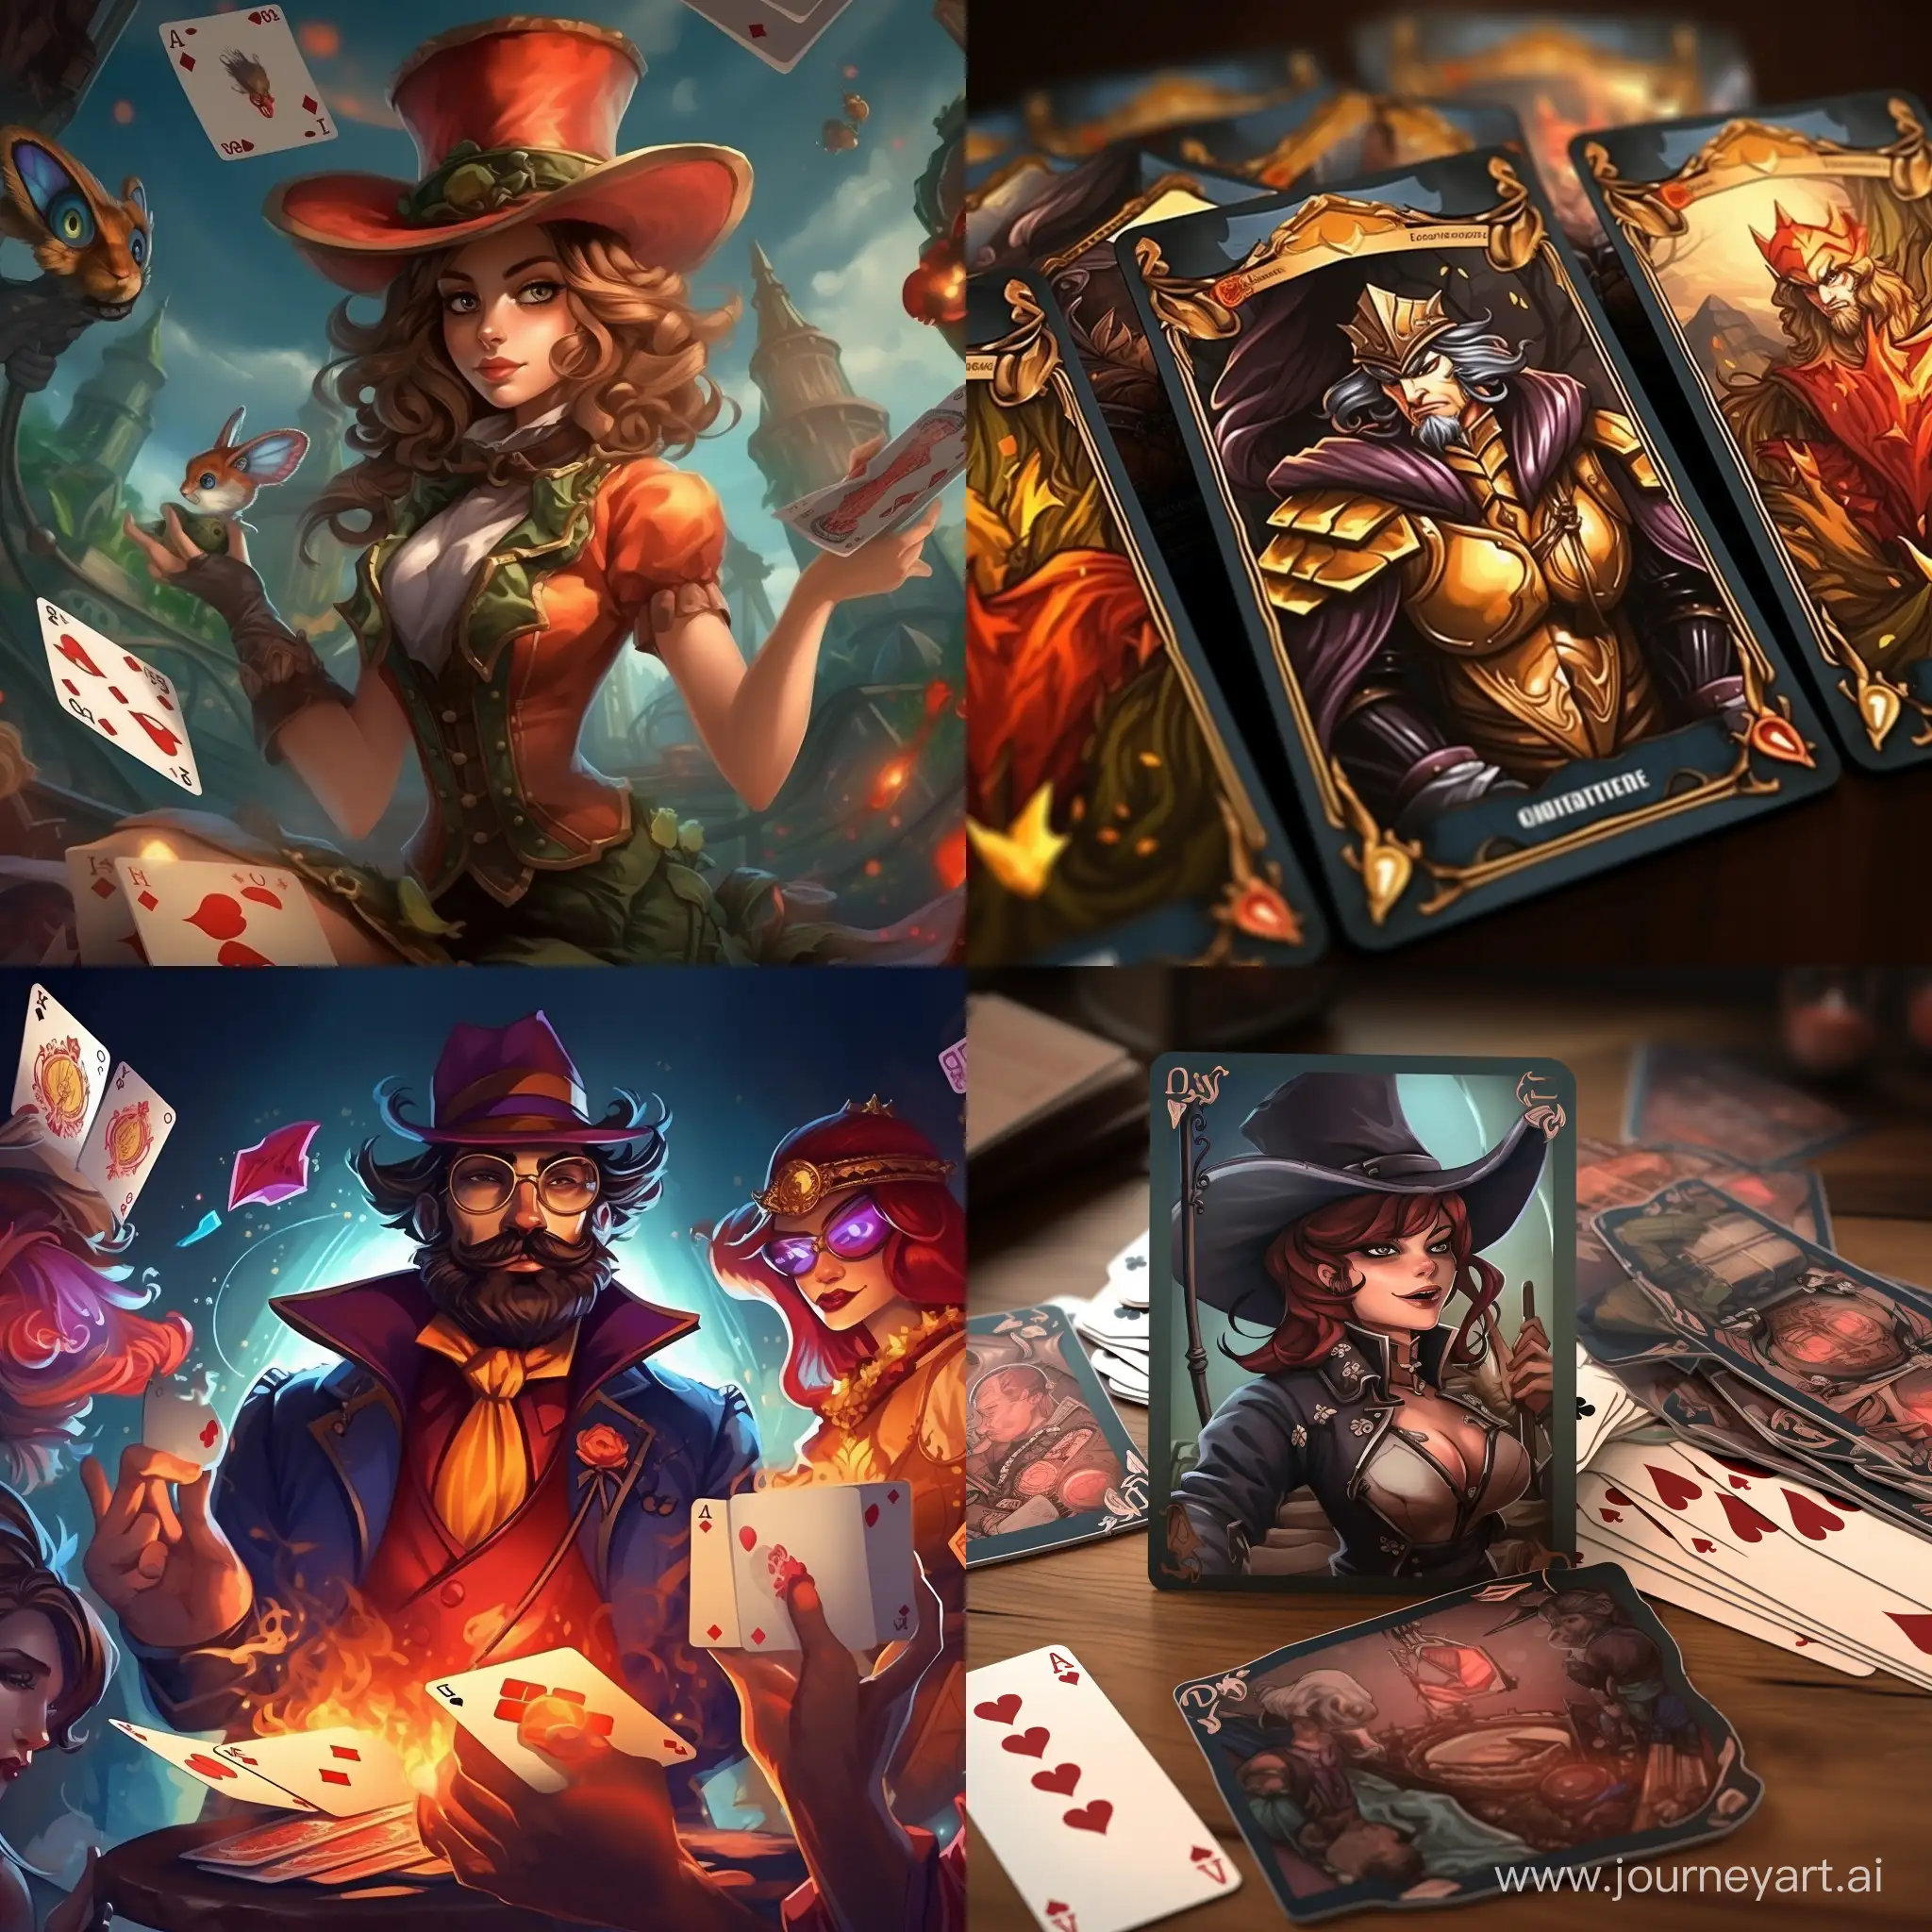 Vibrant-Fantasy-Card-Game-Illustration-with-Unique-Characters-and-Settings